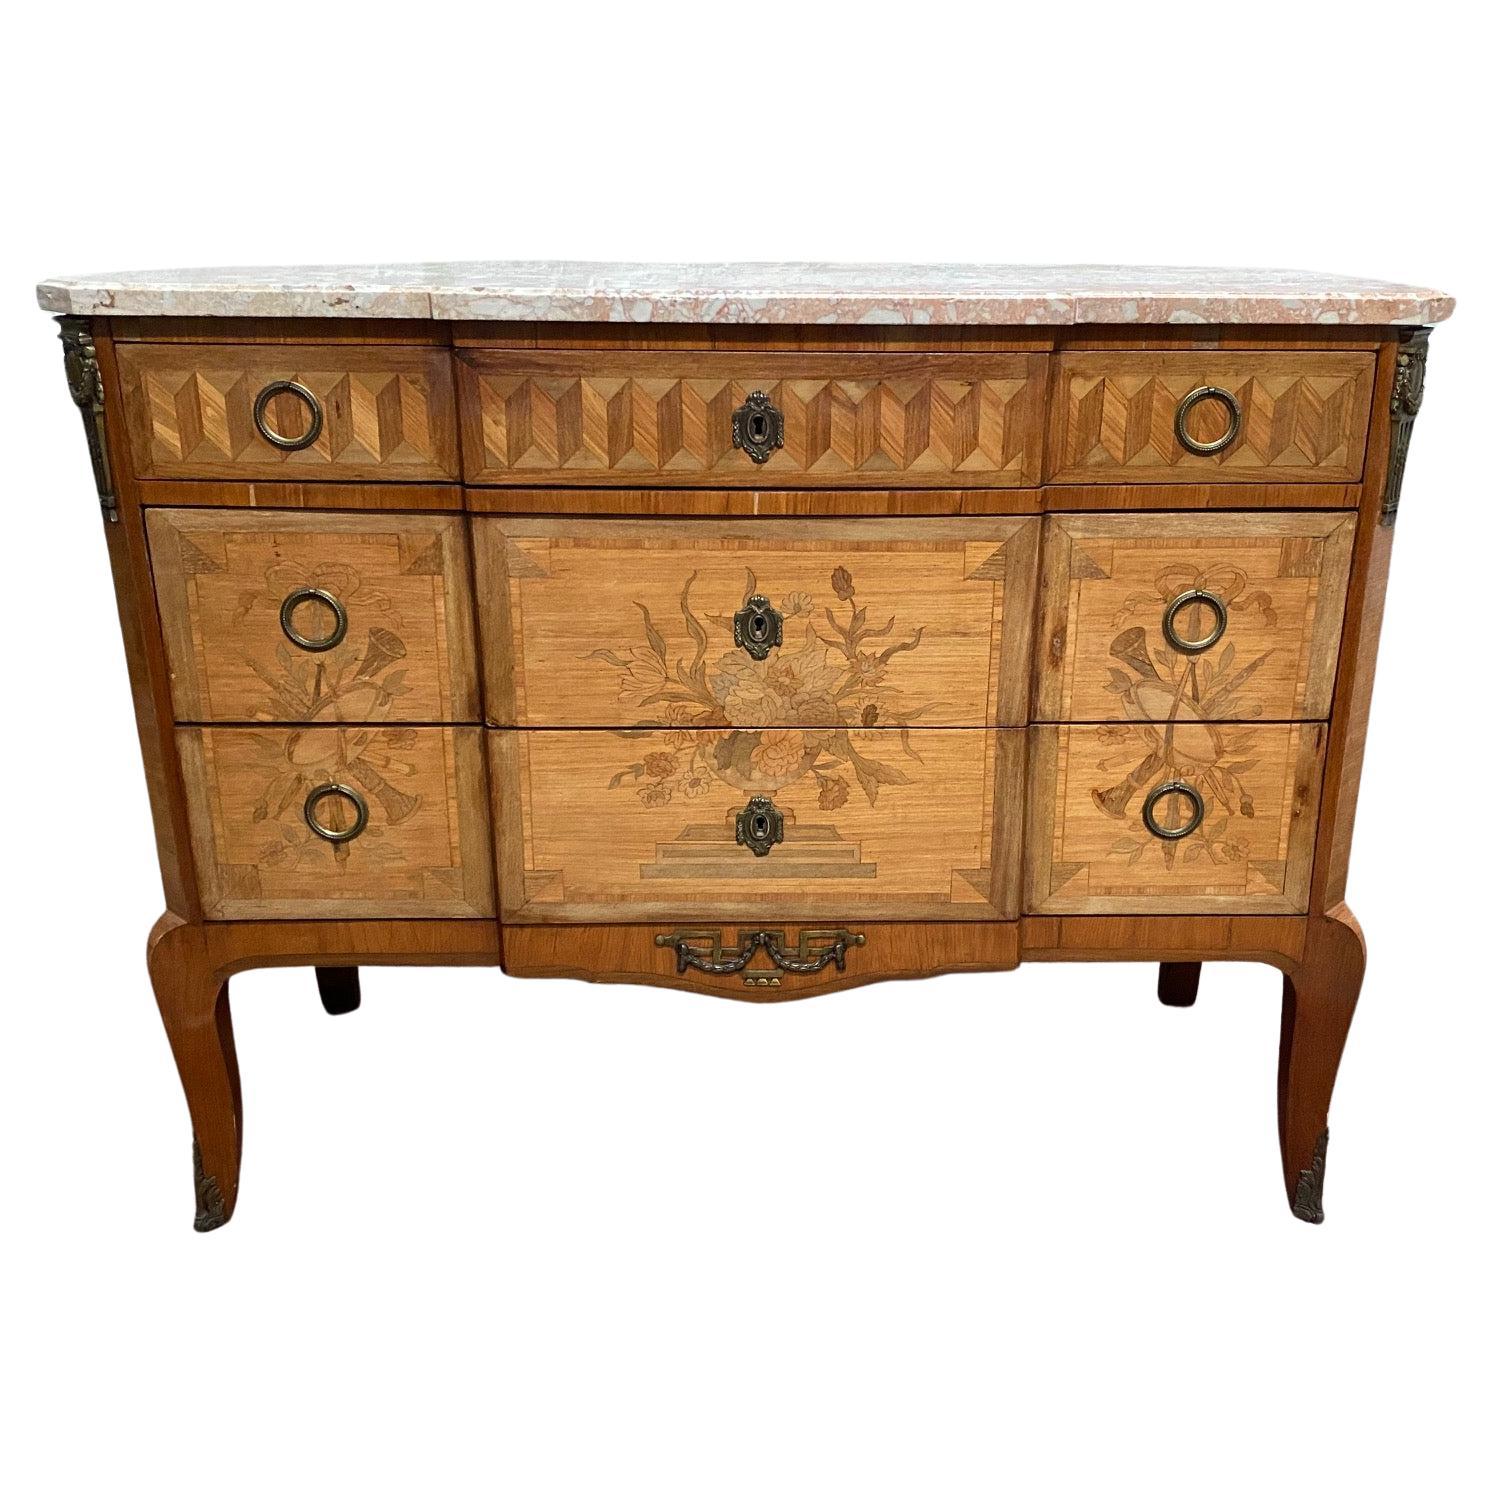 Louis XV-Louis XVI Transition Style Marquetry Inlaid Commode